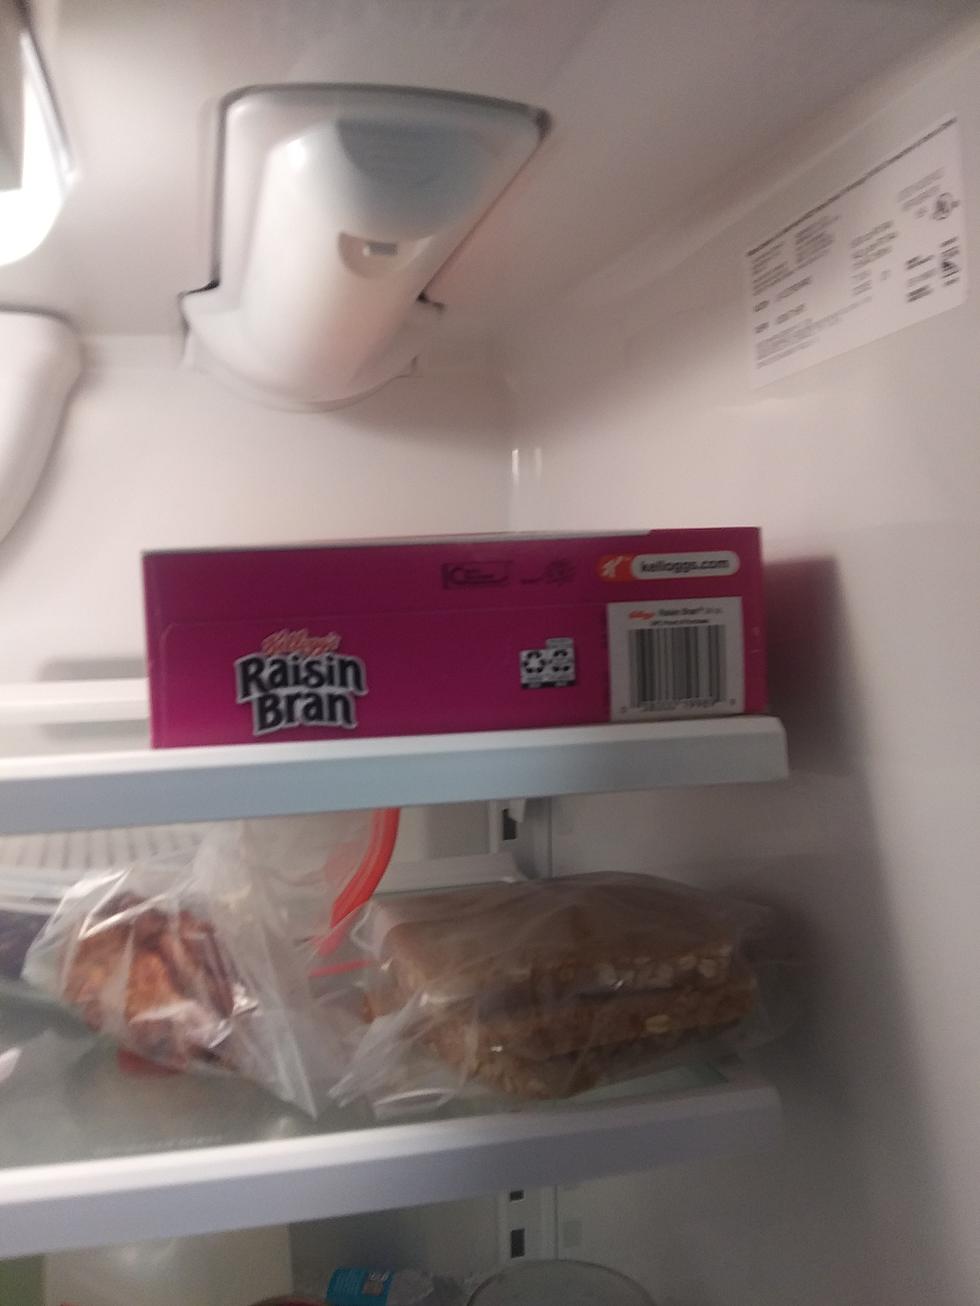 I Have Never Seen Someone Put Cereal In The Fridge, But Today Is That Day